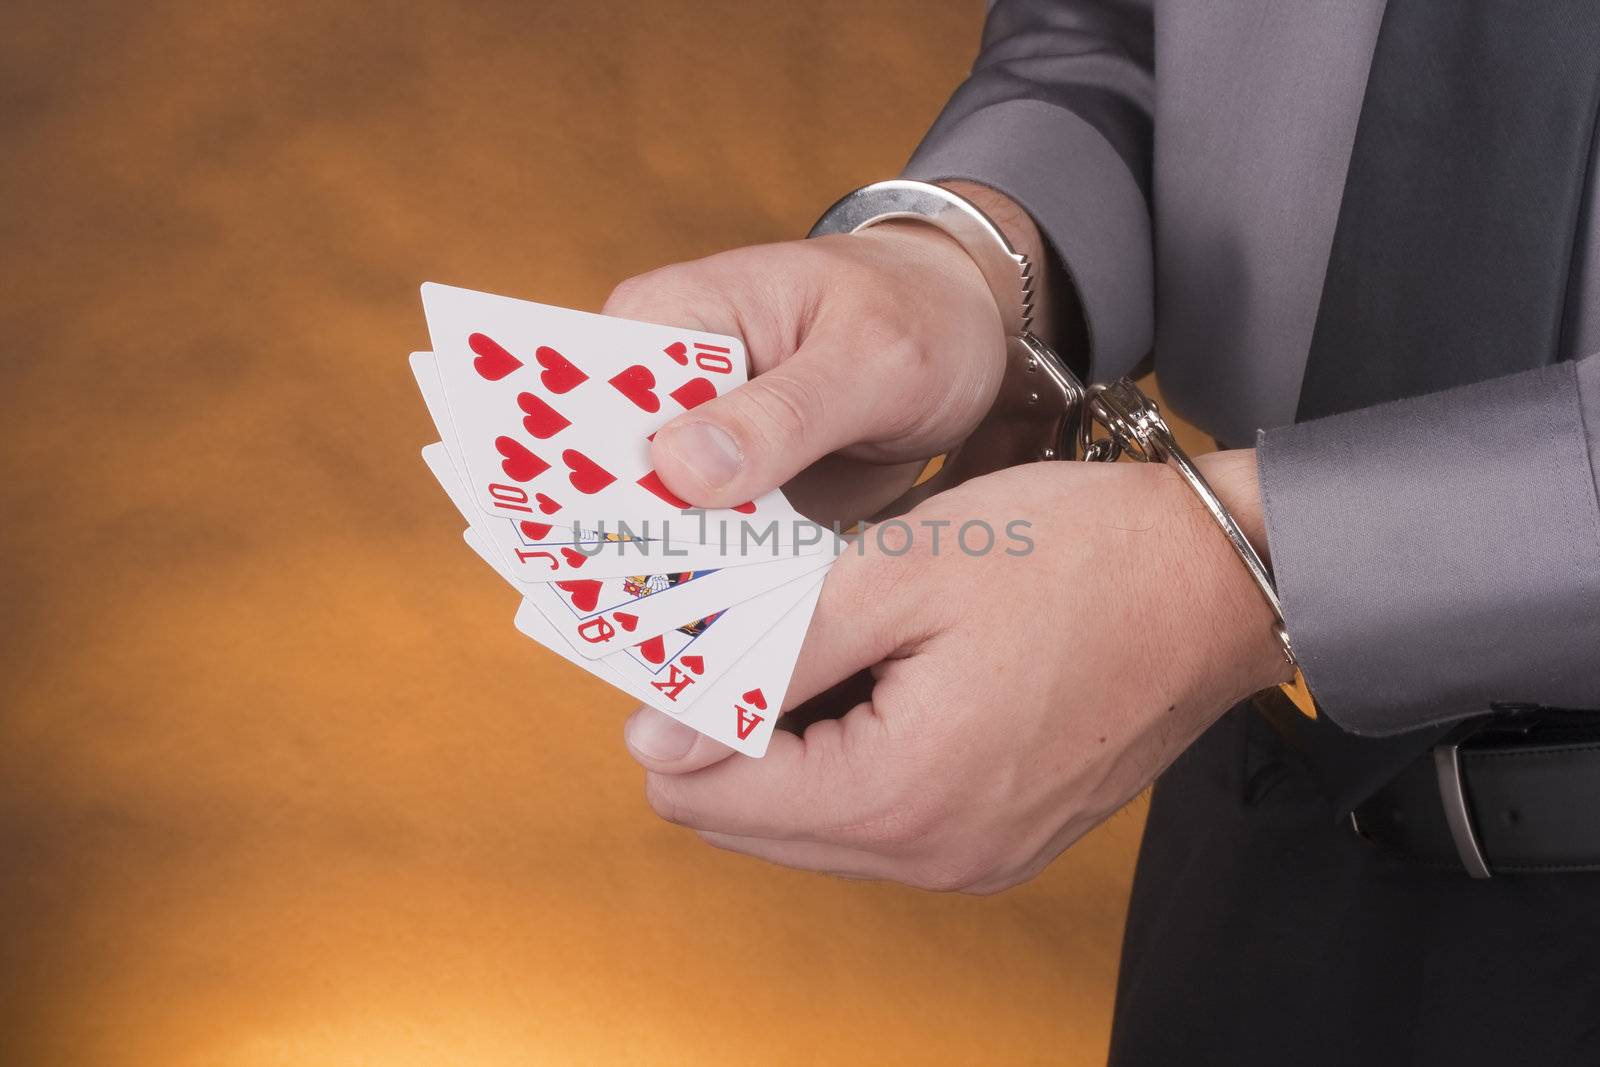 Arrest card sharper, her hands handcuffed in one hand a set of cards in one suit.